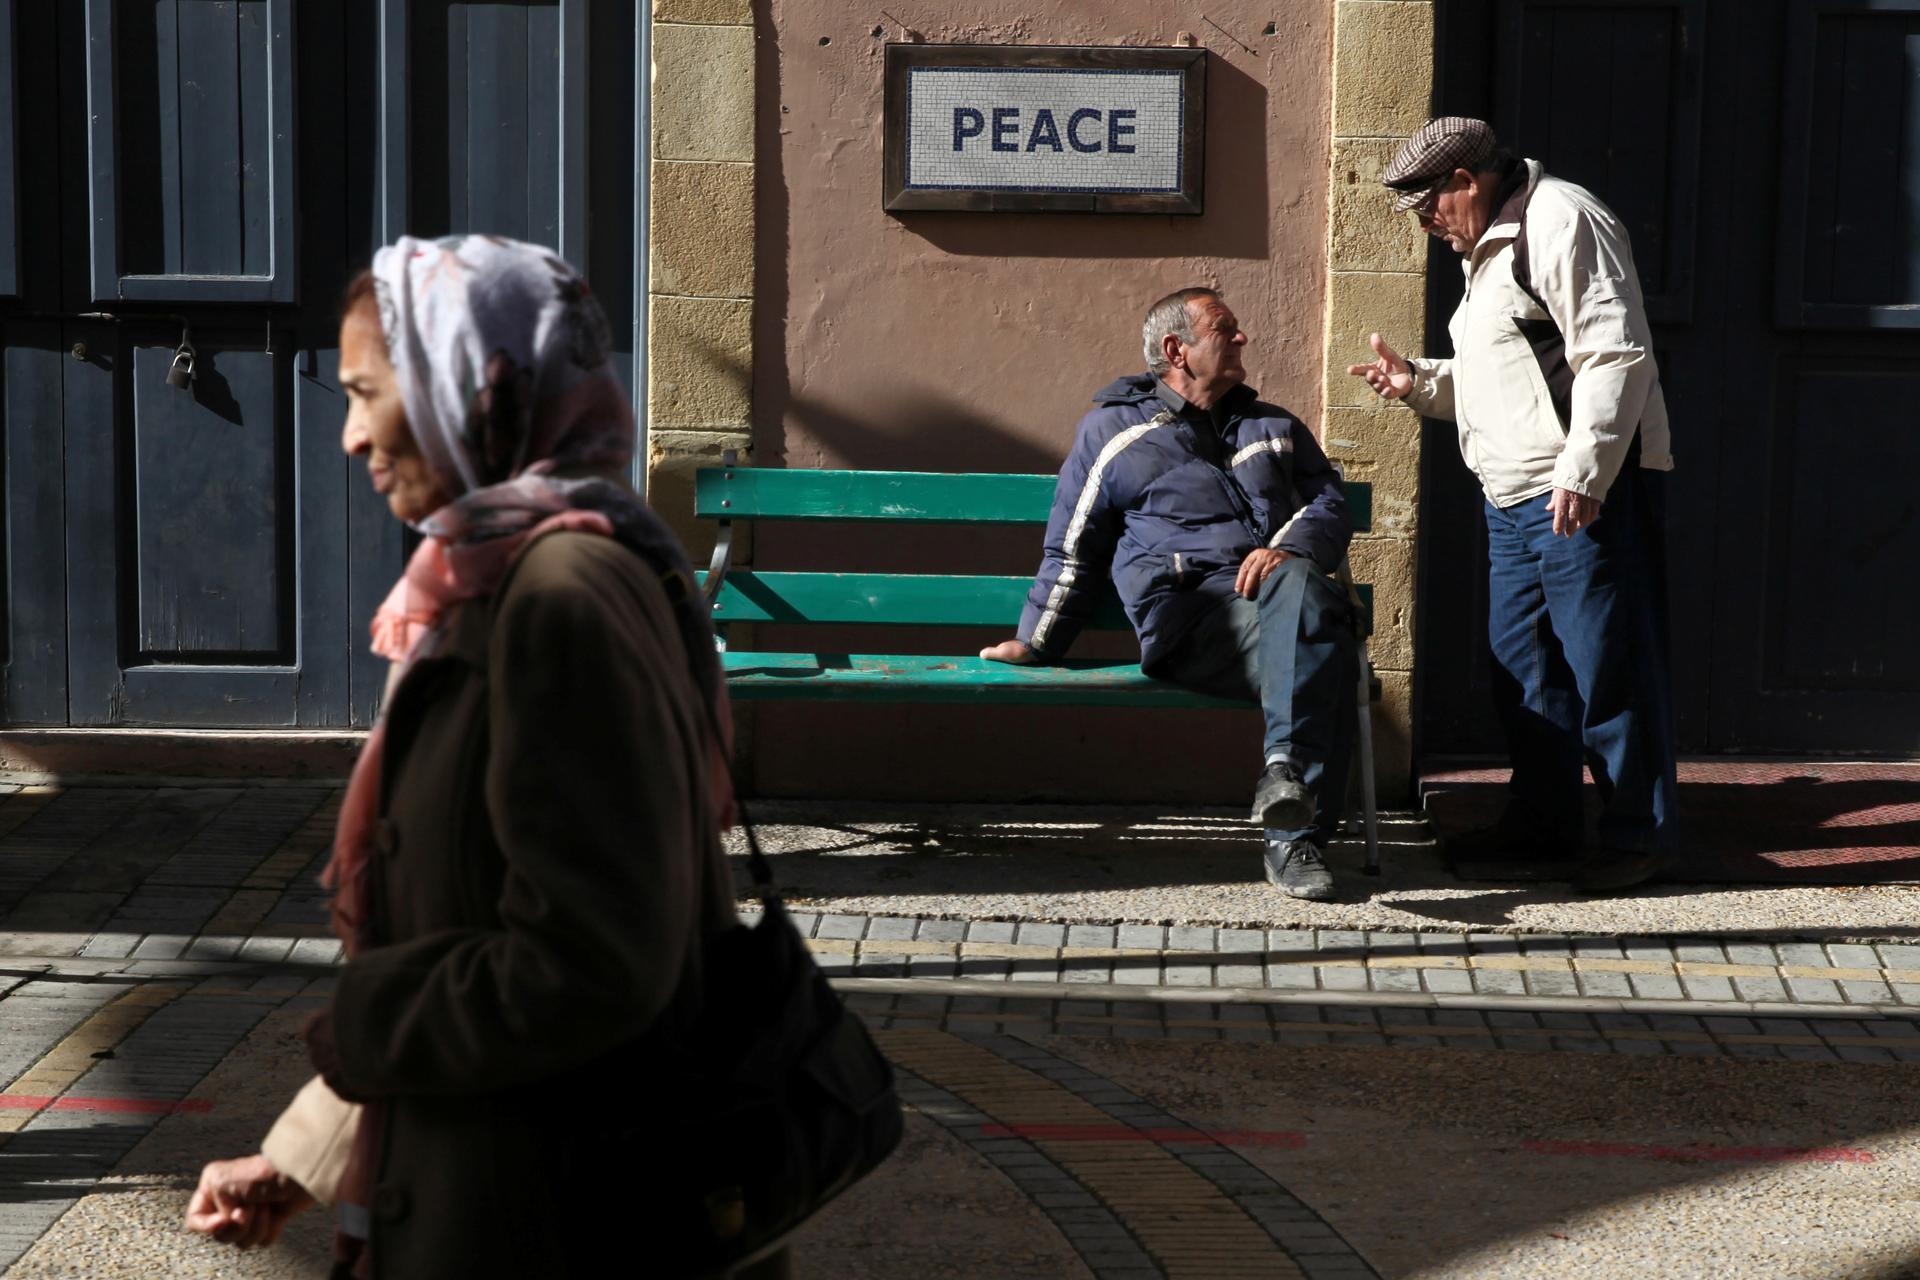 People are seen on Ledras Street next to a peace sign near the UN-controlled buffer zone in Nicosia, Cyprus, January 11, 2017.